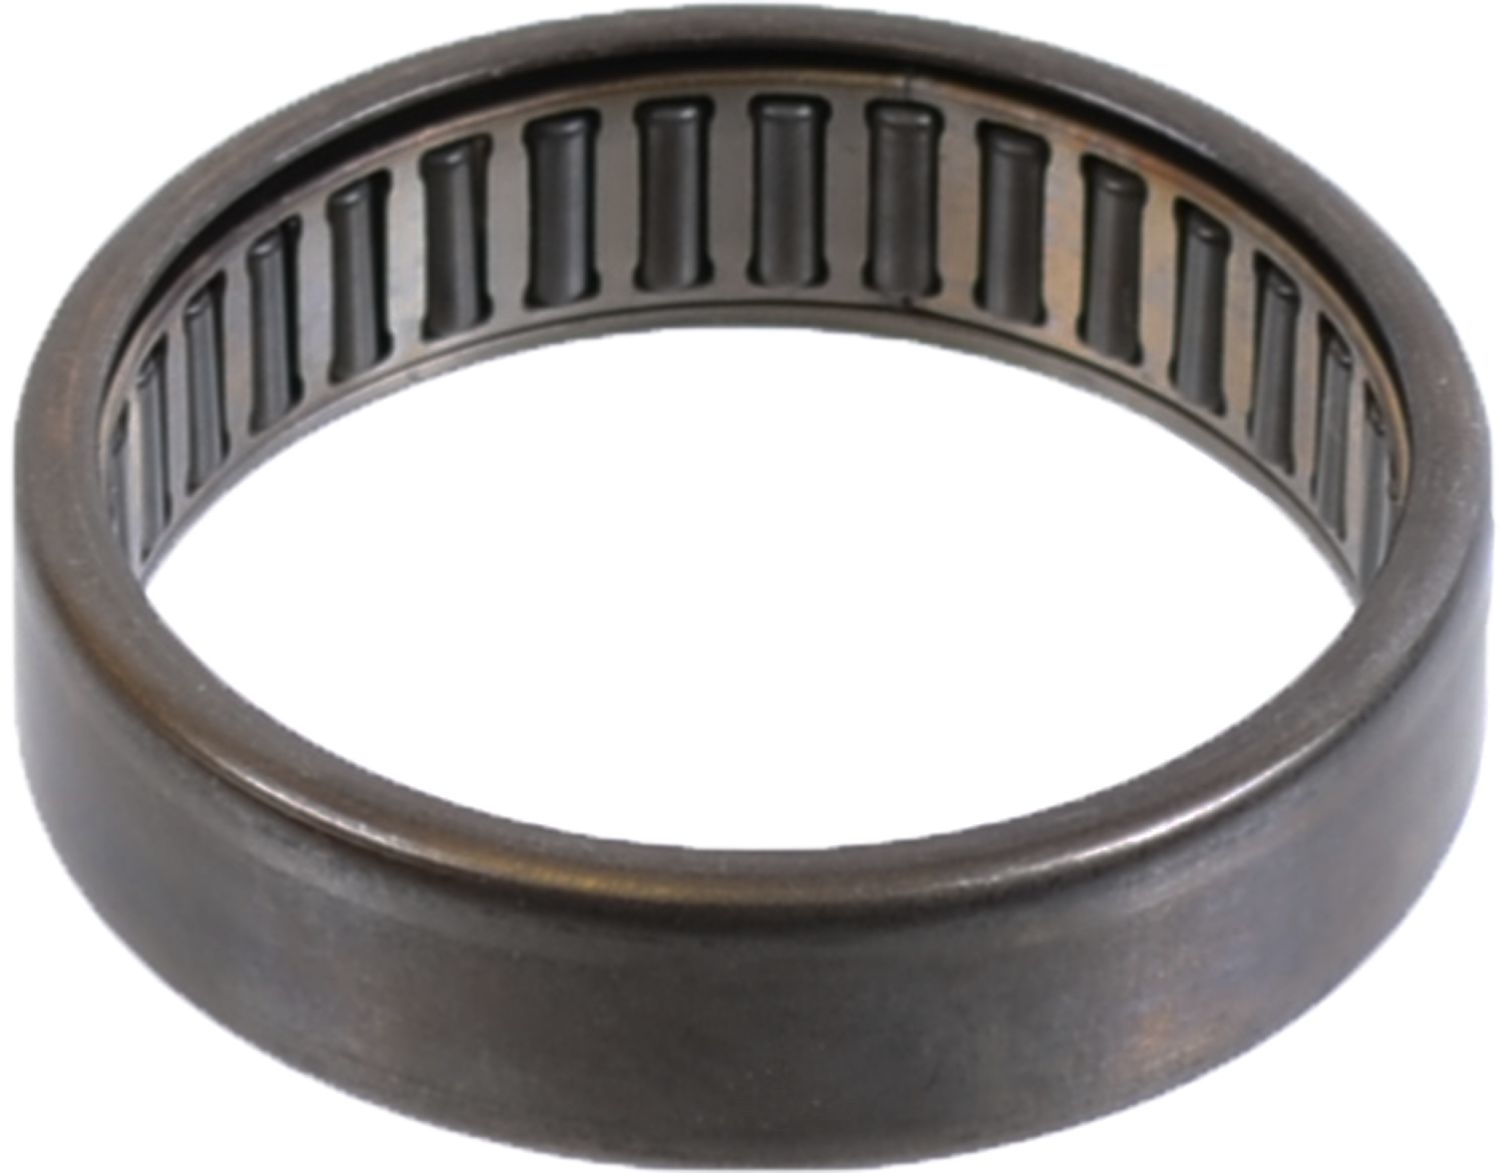 SKF (CHICAGO RAWHIDE) - Differential Pinion Bearing - SKF HK4012 VP